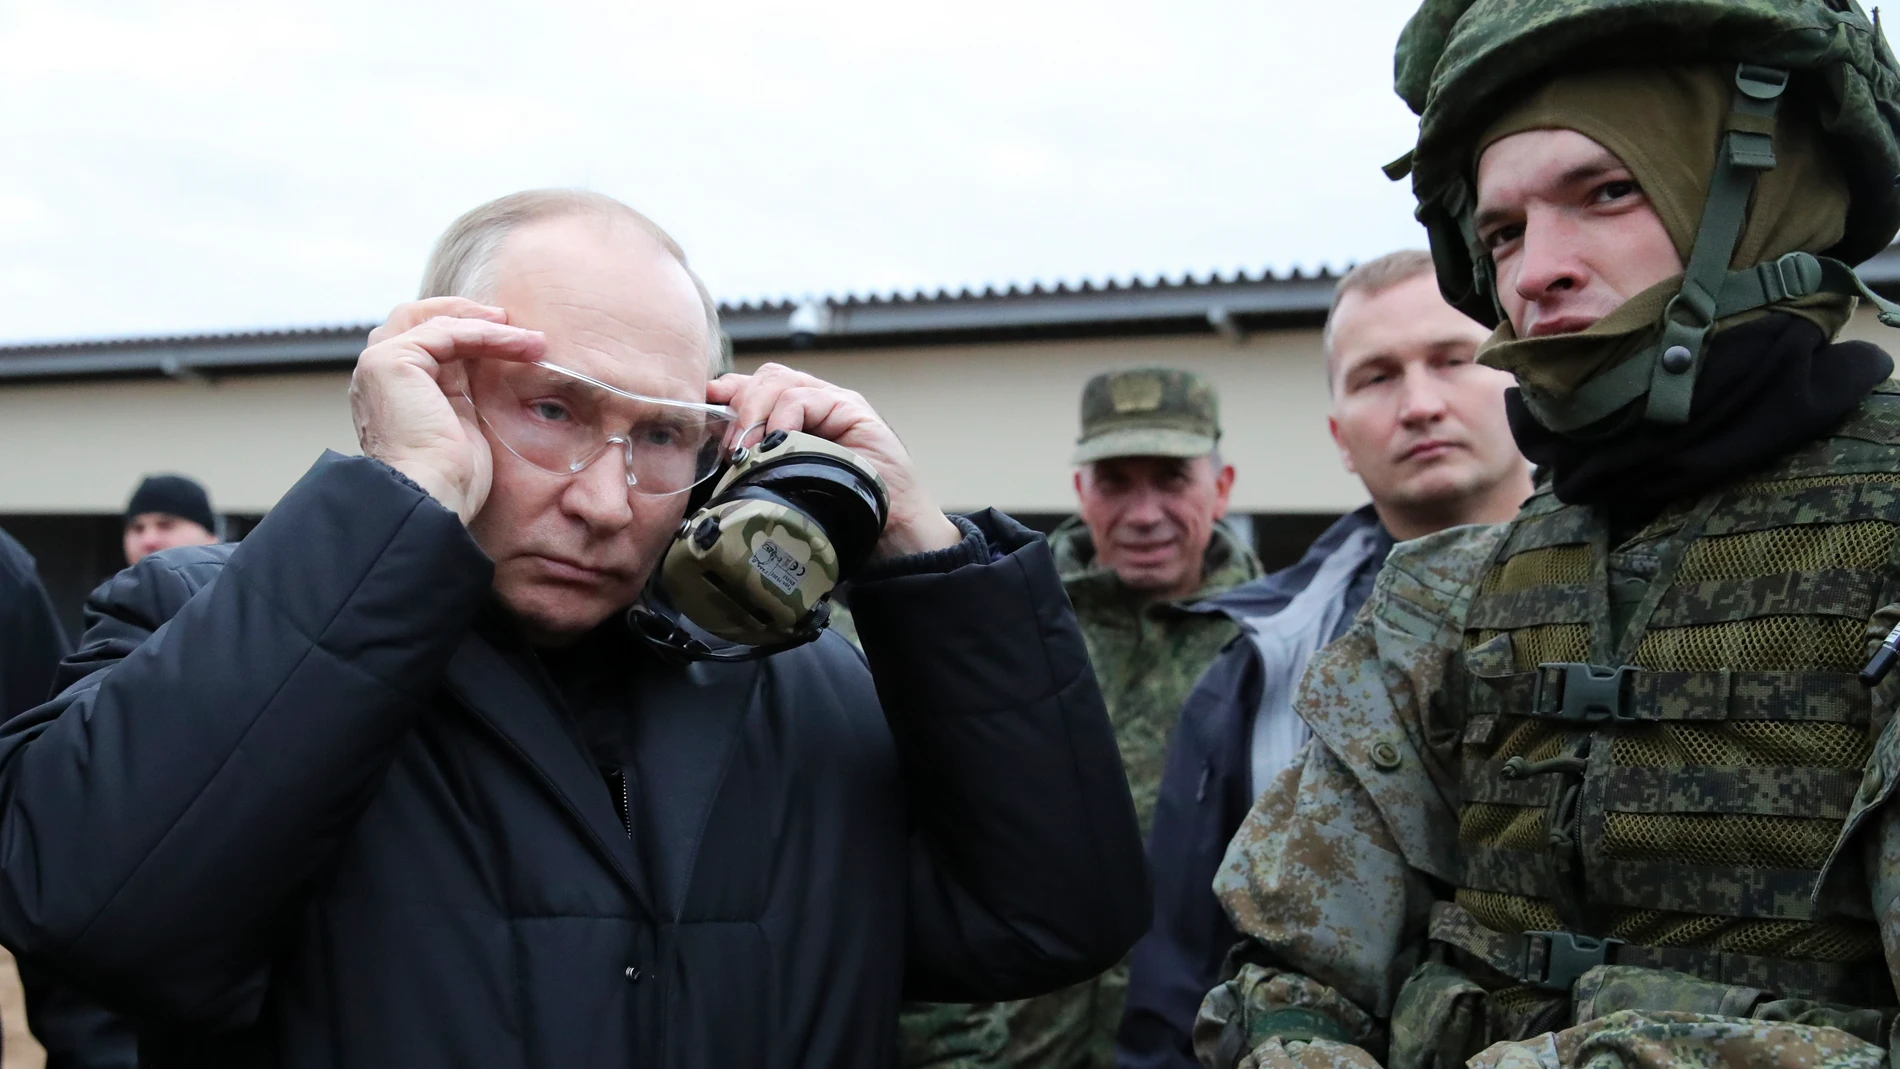 FILE - Russian President Vladimir Putin puts on protective glasses as he visits a military training center of the Western Military District for mobilized reservists in Ryazan Region, Russia, Thursday, Oct. 20, 2022. (Mikhail Klimentyev, Sputnik, Kremlin Pool Photo via AP, File)